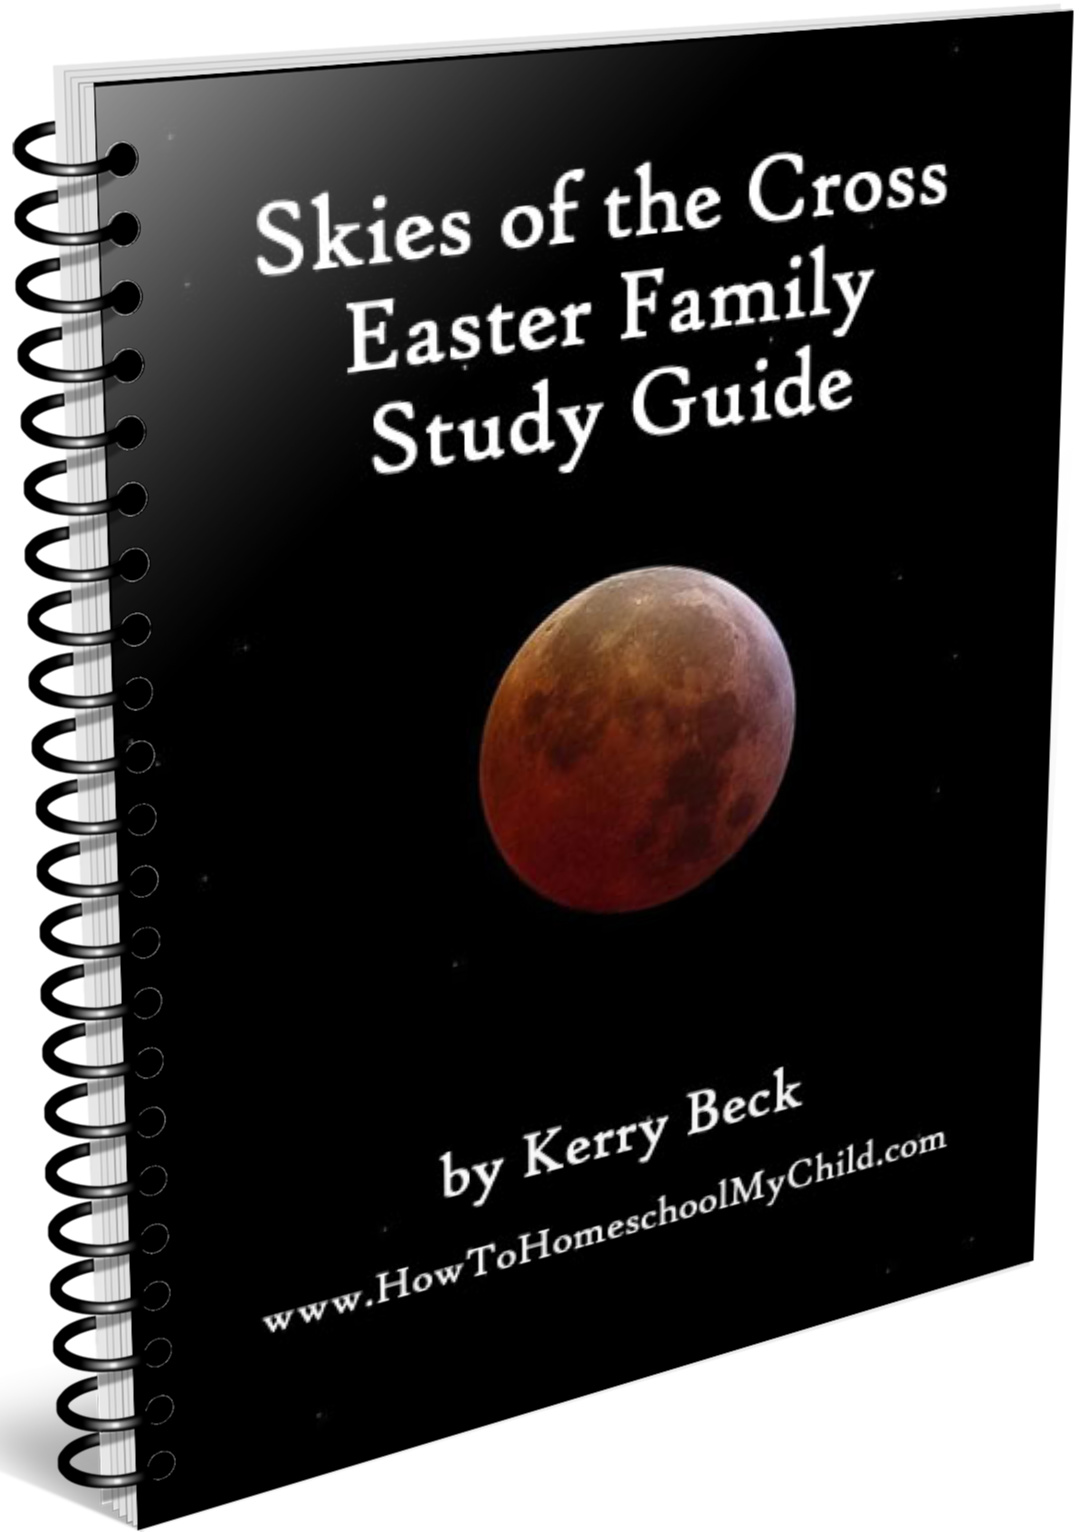 Skies of the Cross Easter Family Study Guide 